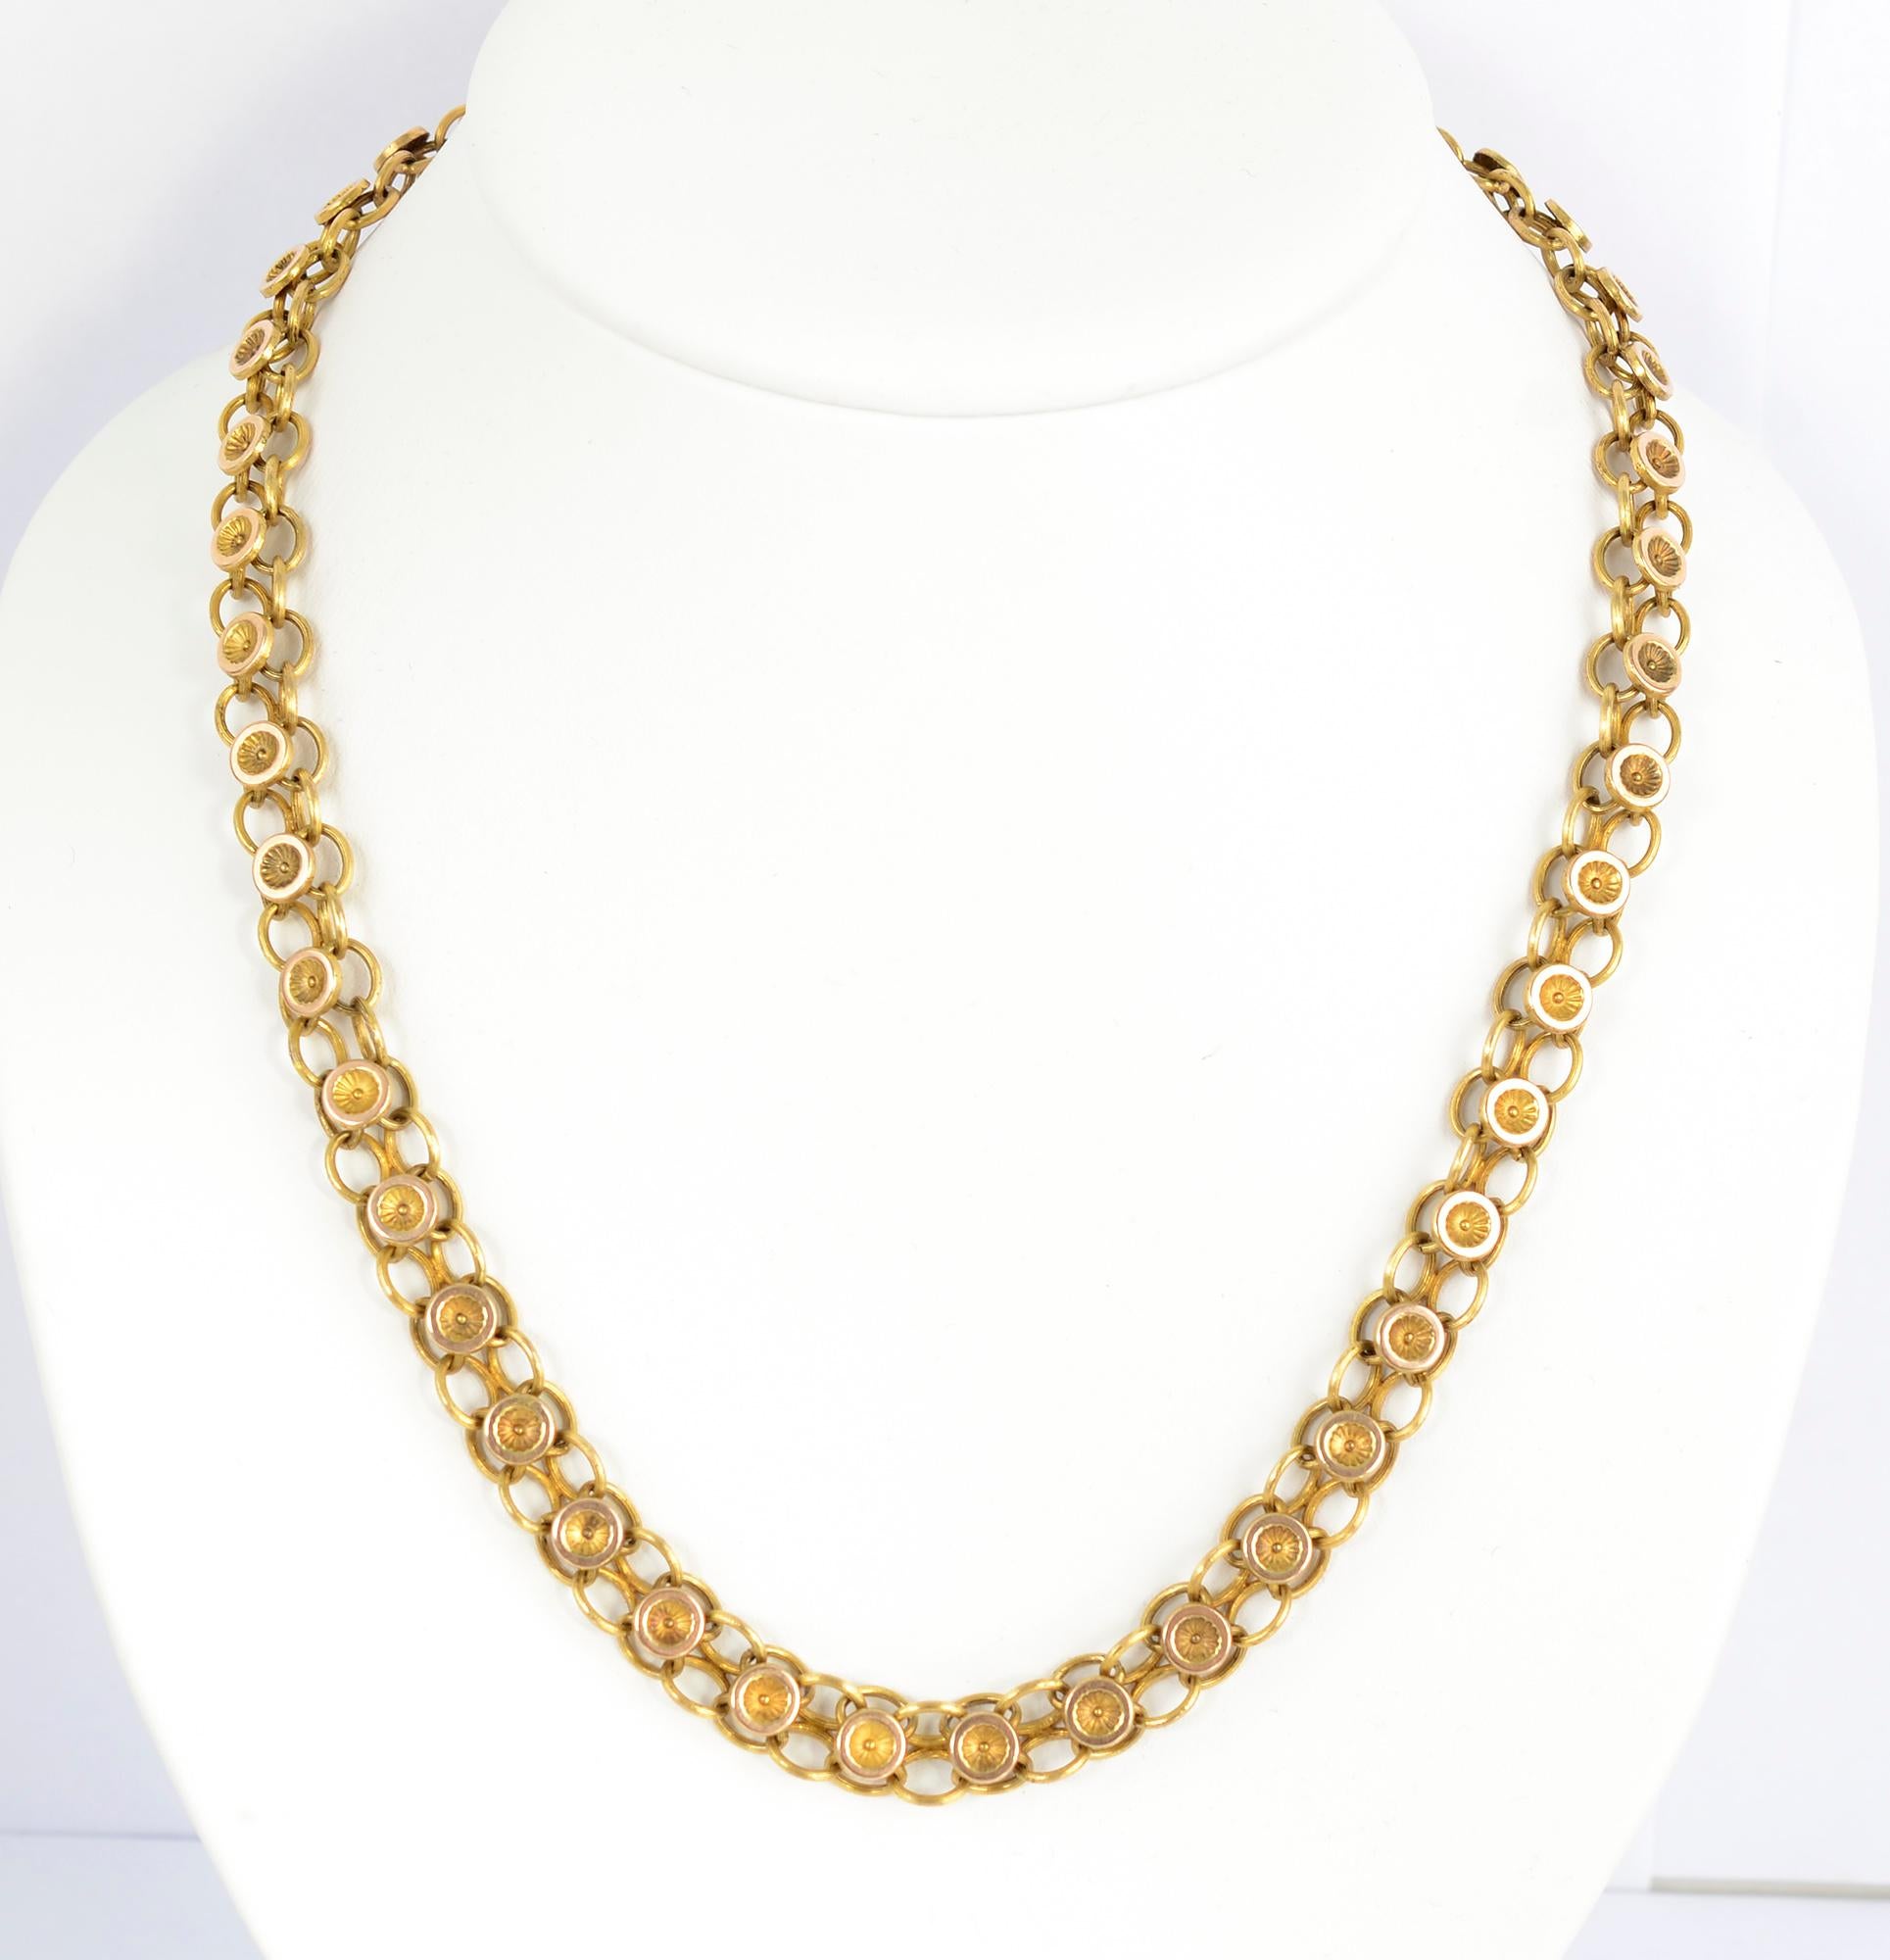 Handmade Victorian chain necklace of 14 karat gold. Round medallions sit upon a double row of oval links. The necklace is 20 inches long. It can be worn on its own or with a pendant suspended.